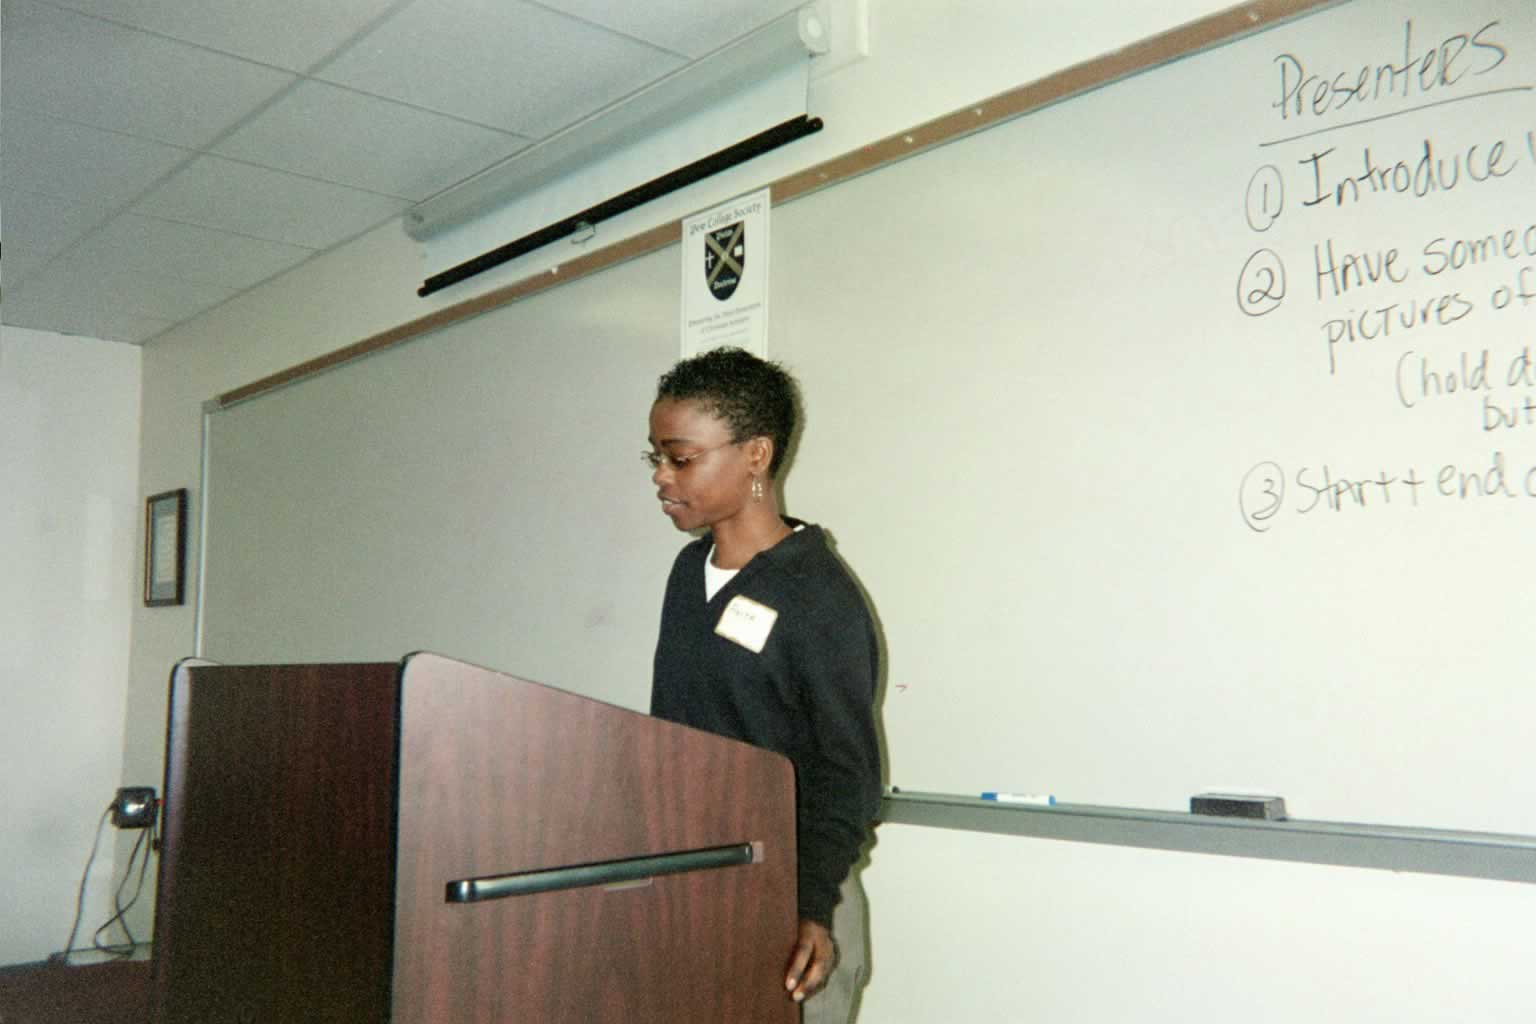 picture of a woman wearing glasses standing behind a podium speaking